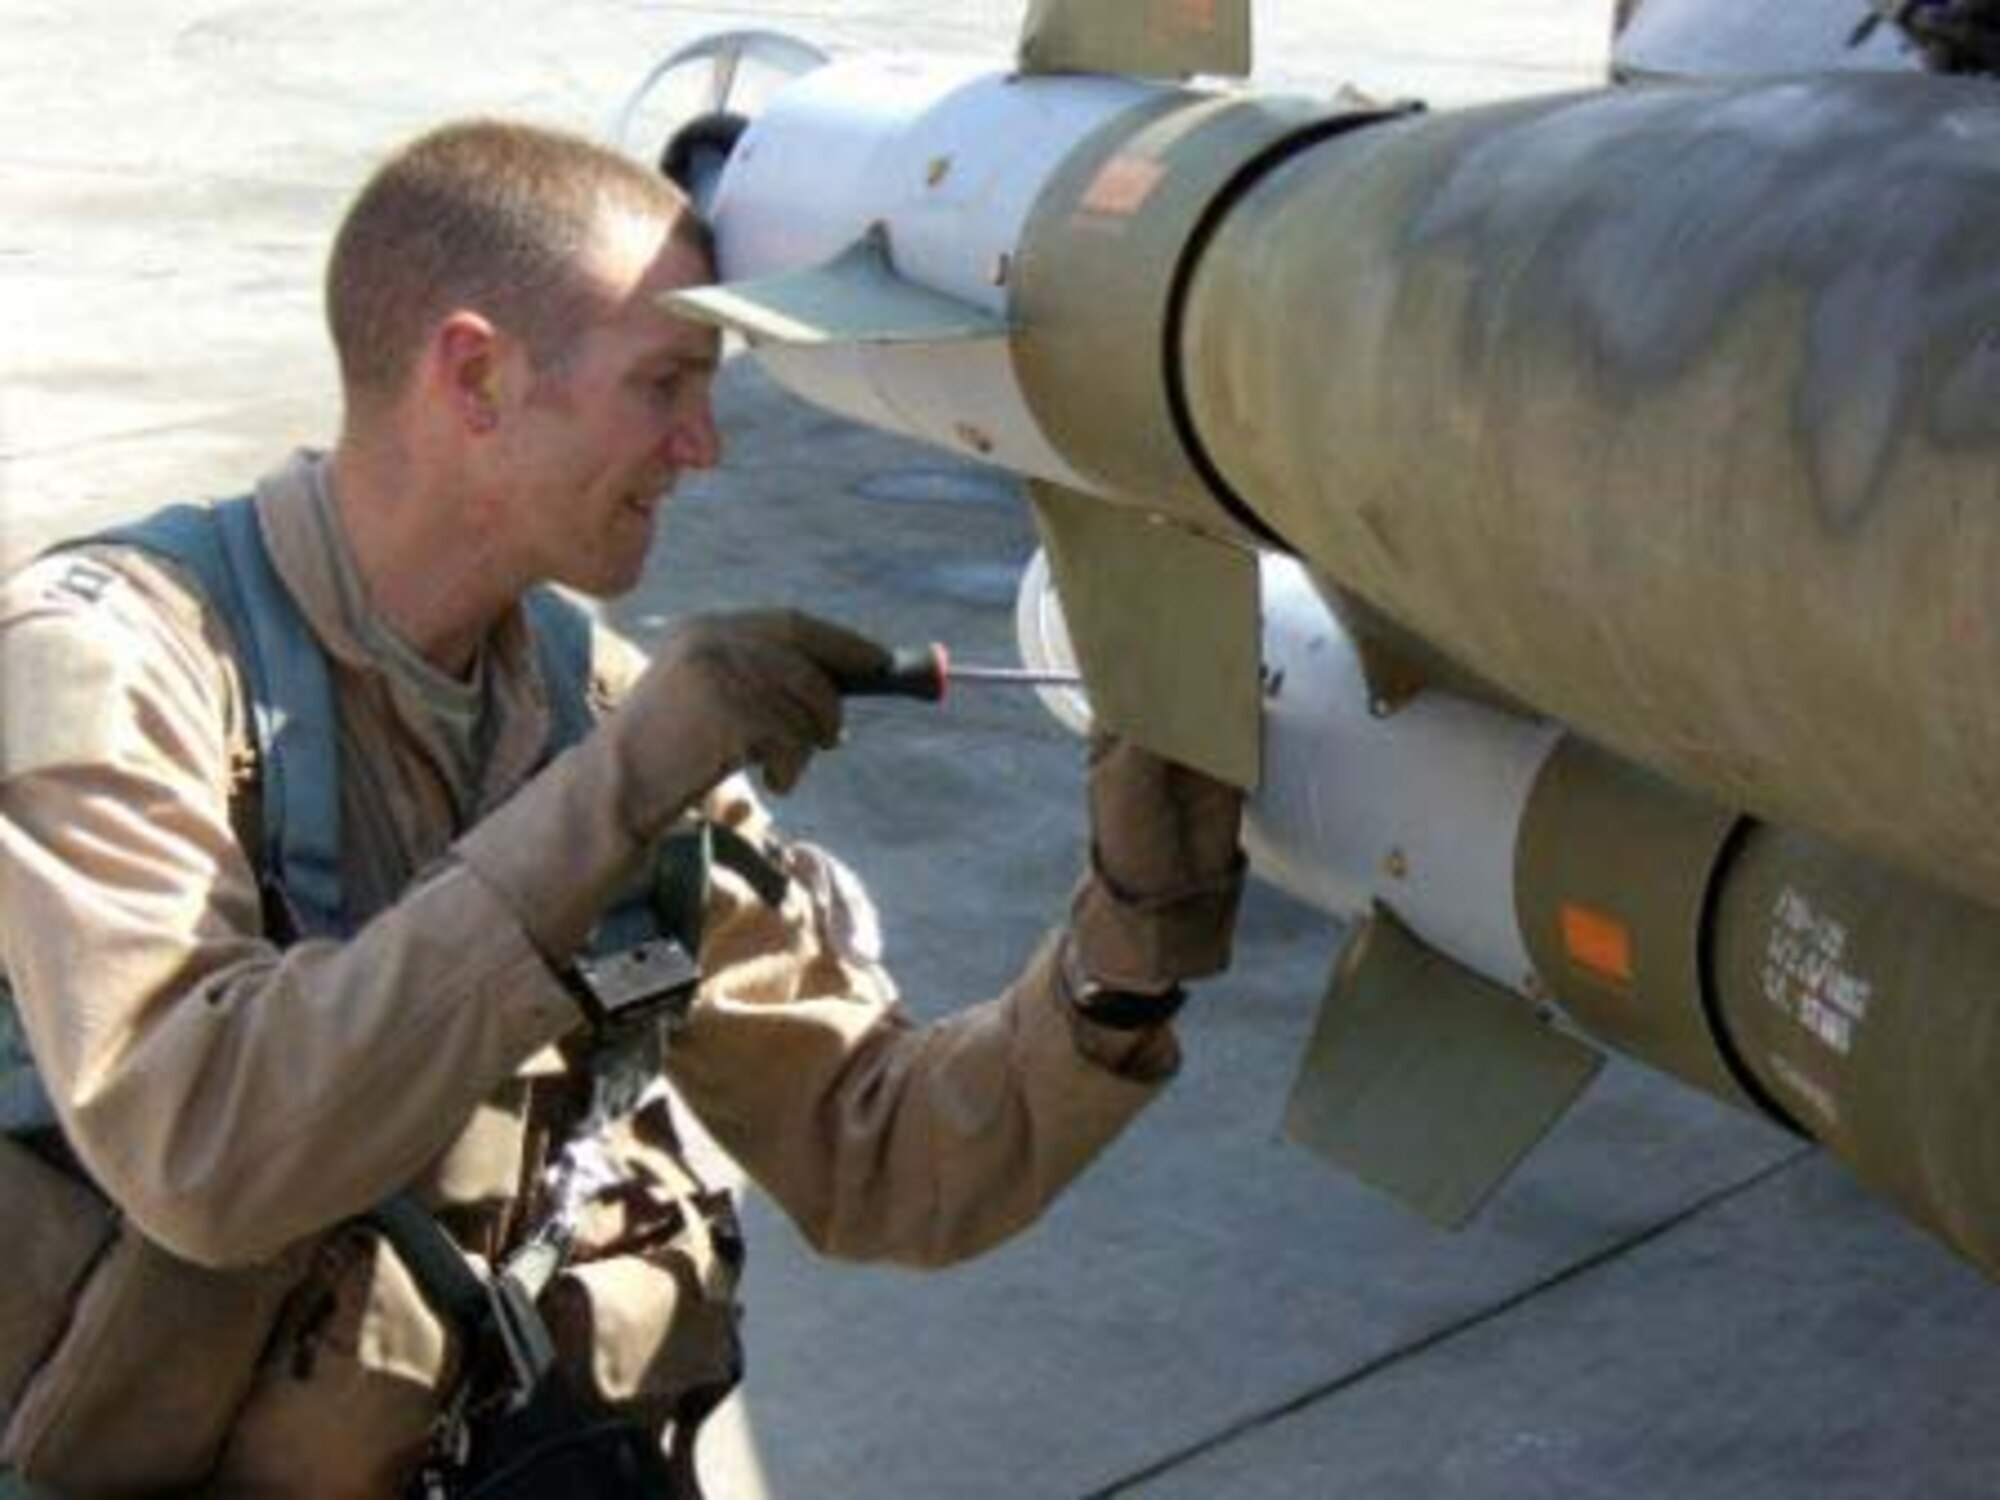 BALAD AIR BASE, Iraq -- Capt. "Cuda" Wolfard, 13th Expeditionary Fighter Squadron plans officer, sets the laser code to his GBU-12 Laser Guided Bombs on his 41st mission in Operation Iraqi Freedom.  Captain Wolfard's spouse, Capt. Krystal Wolfard, is also serving in OIF as a multinational corps as an Iraq Intelligence officer deployed to Baghdad. (U.S. Air Force photo)